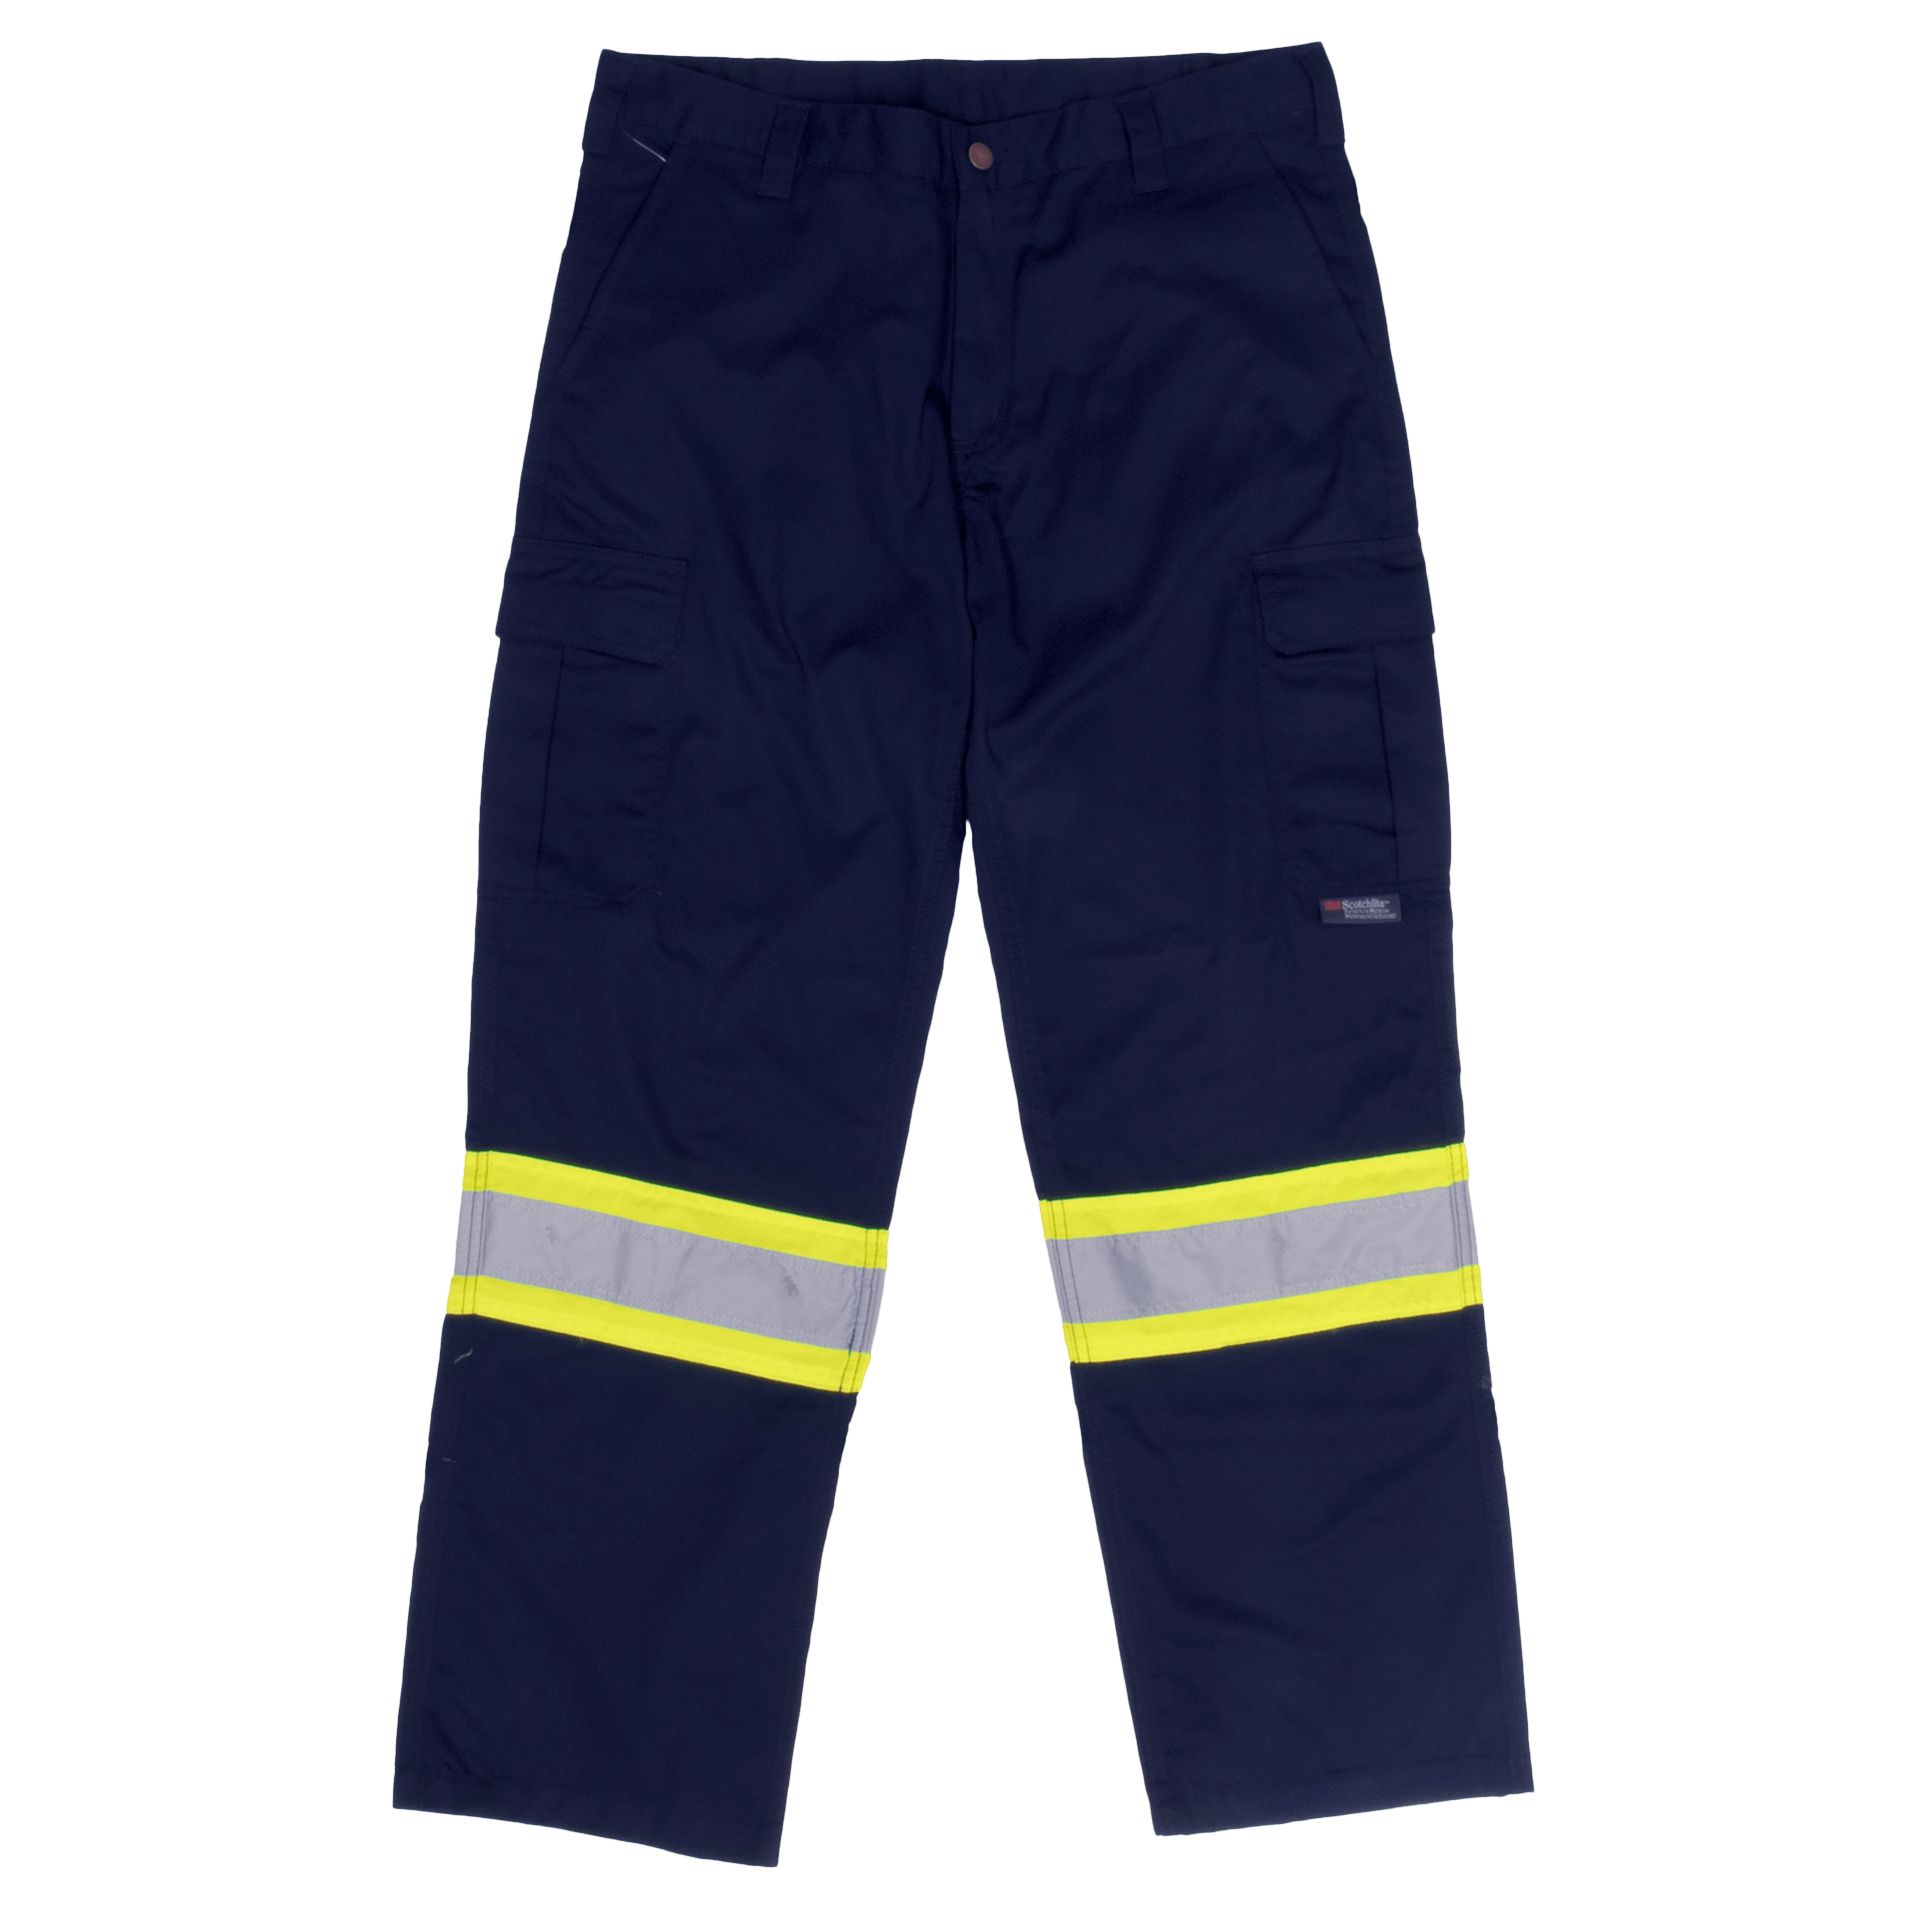 Tough Duck®Safety Cargo Work Pant S607